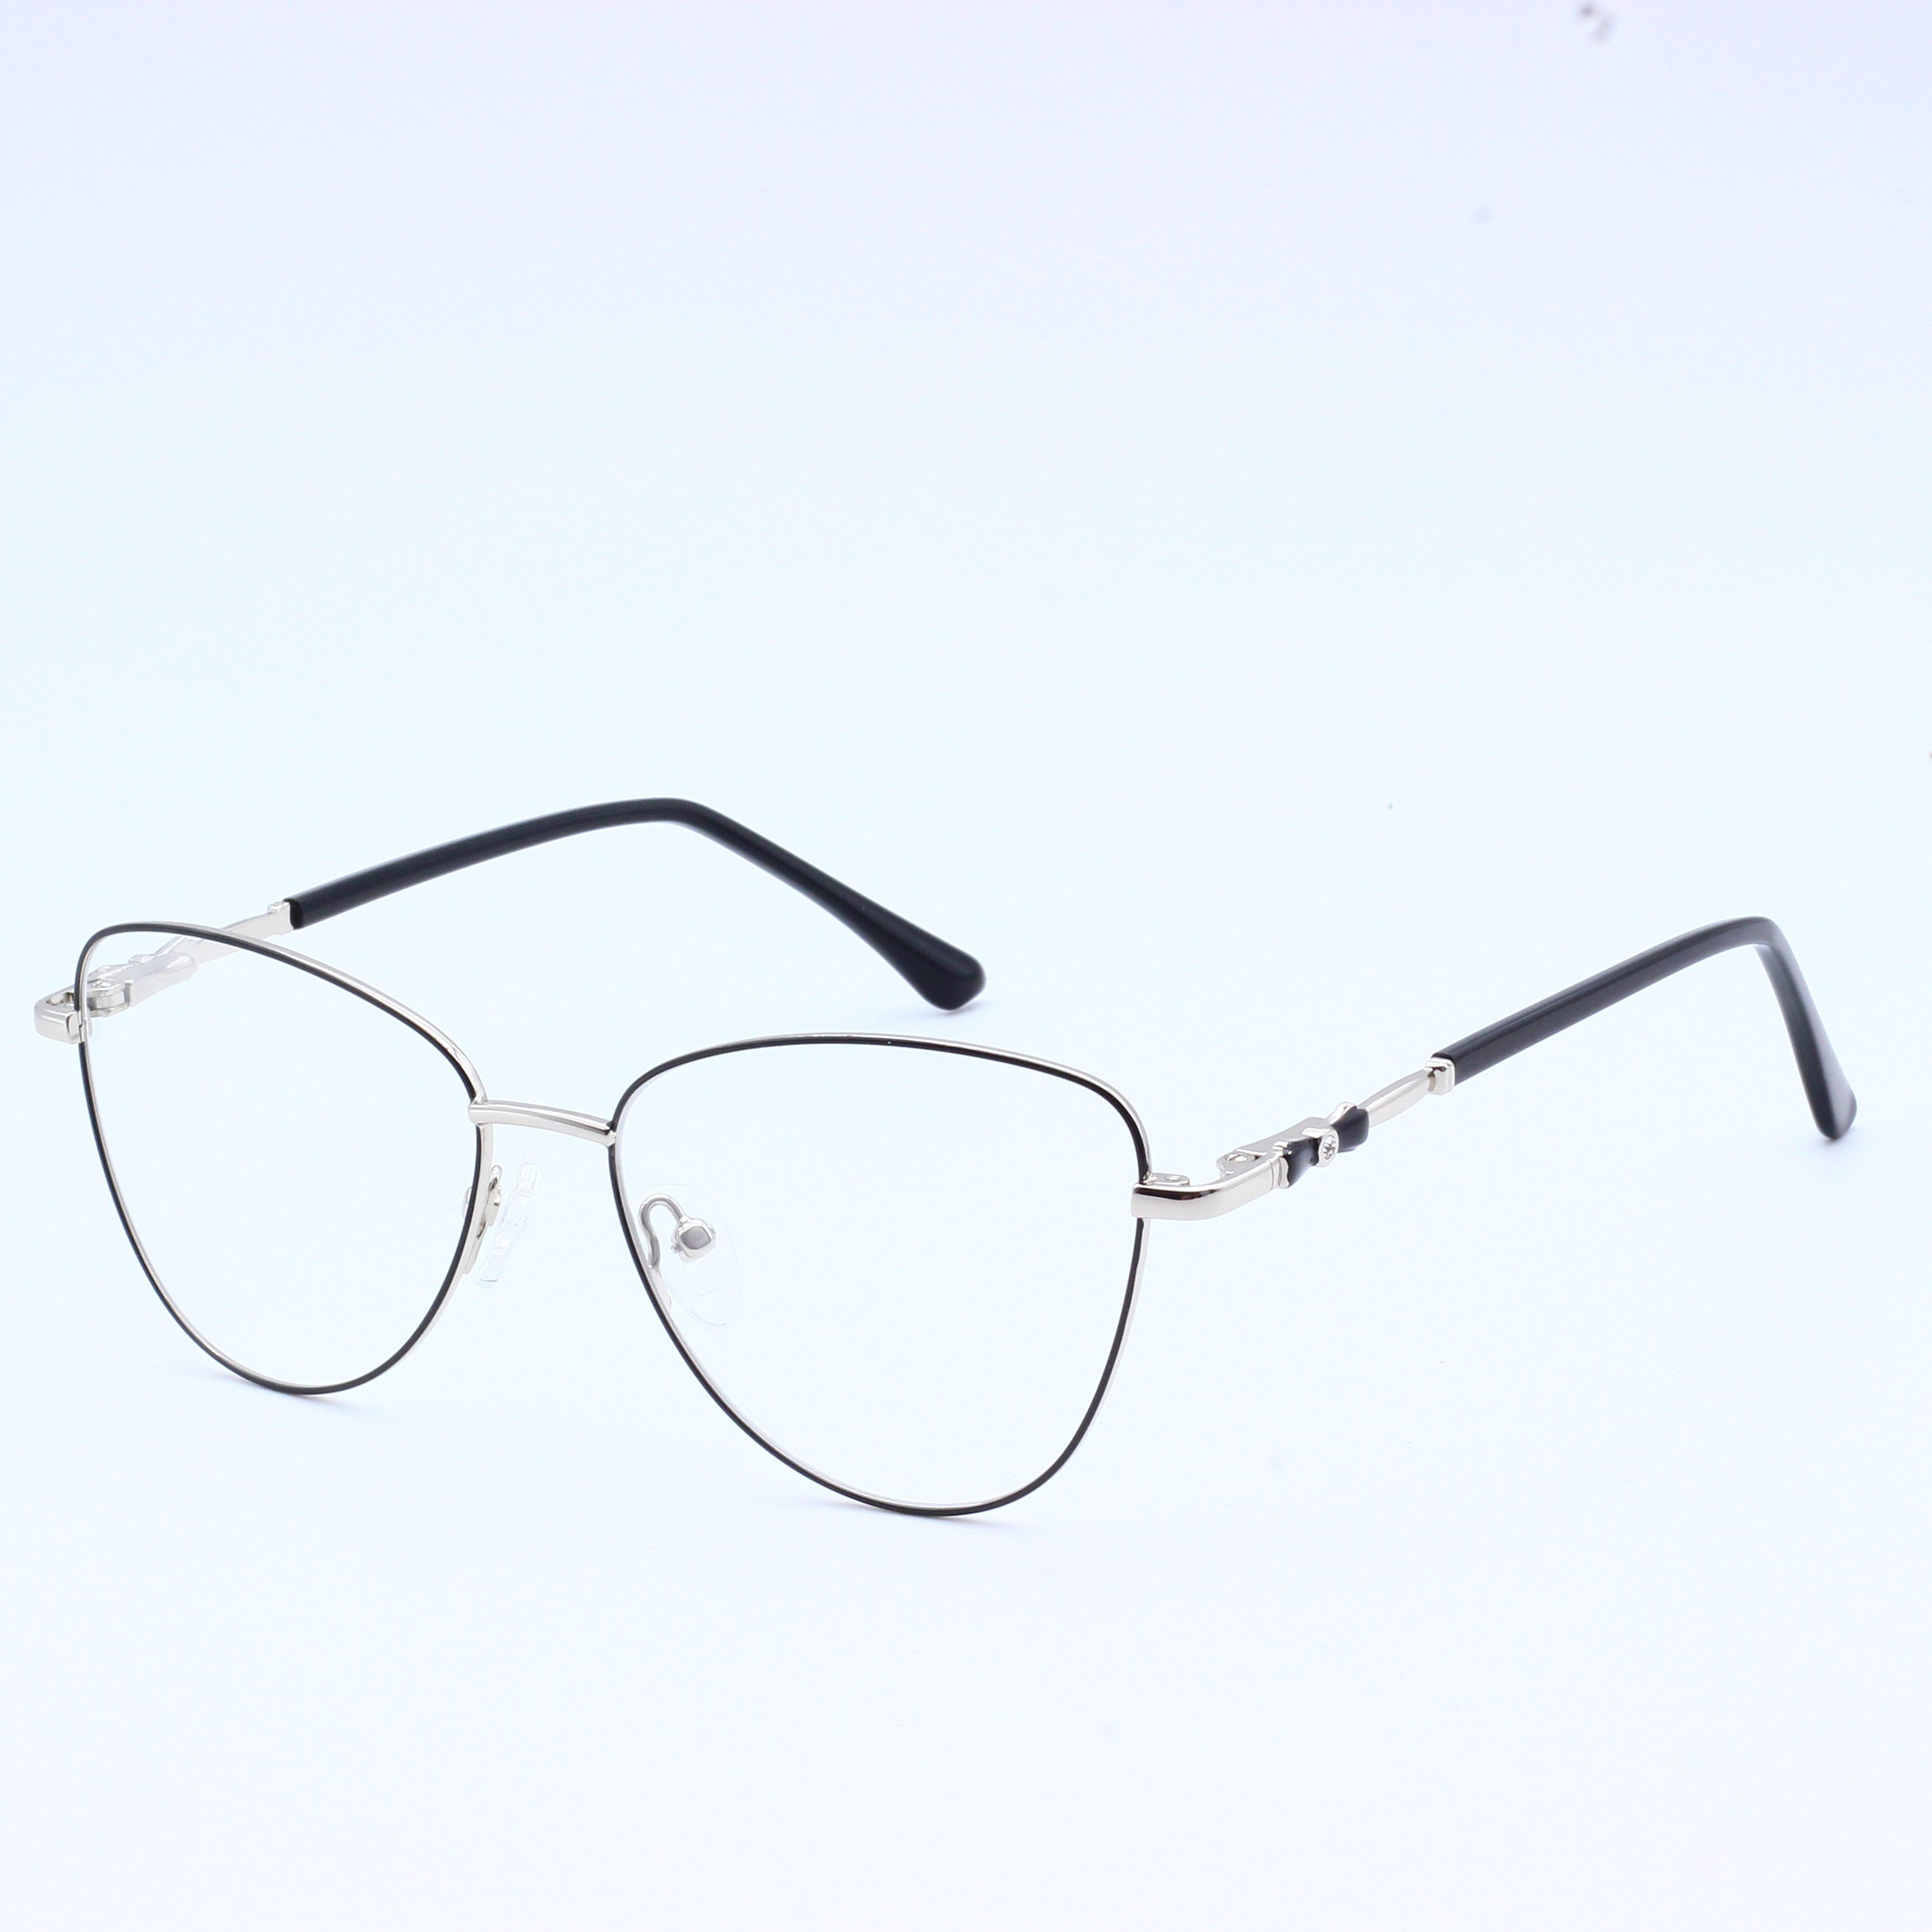 Eyeglasses Business Optical spectacle Frames In Stock (5)